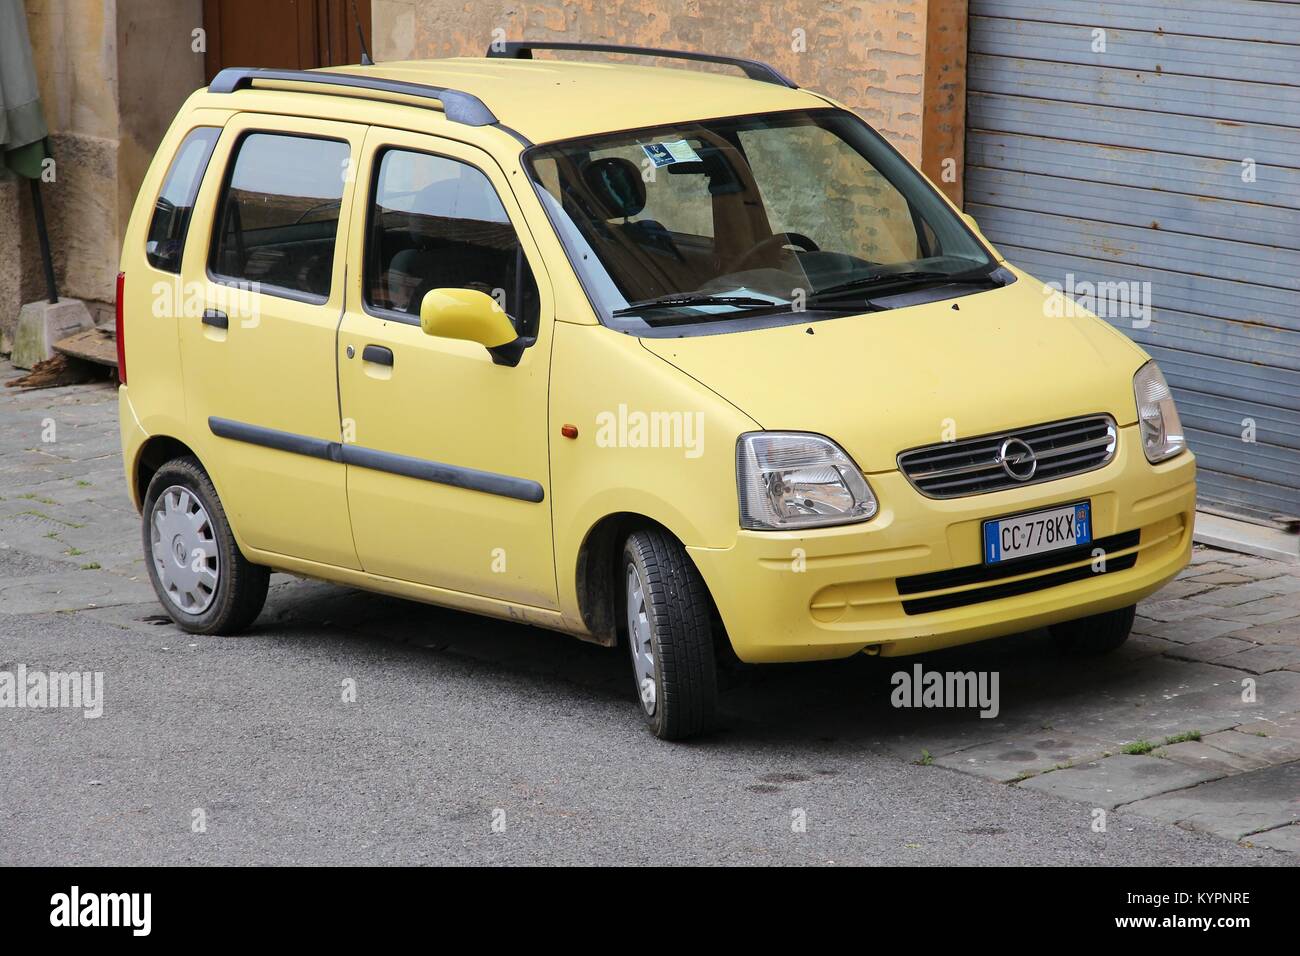 SIENA, ITALY - MAY 3, 2015: Opel Agila car parked in Siena, Italy. Agila  was manufactured in years 2000-2015 Stock Photo - Alamy